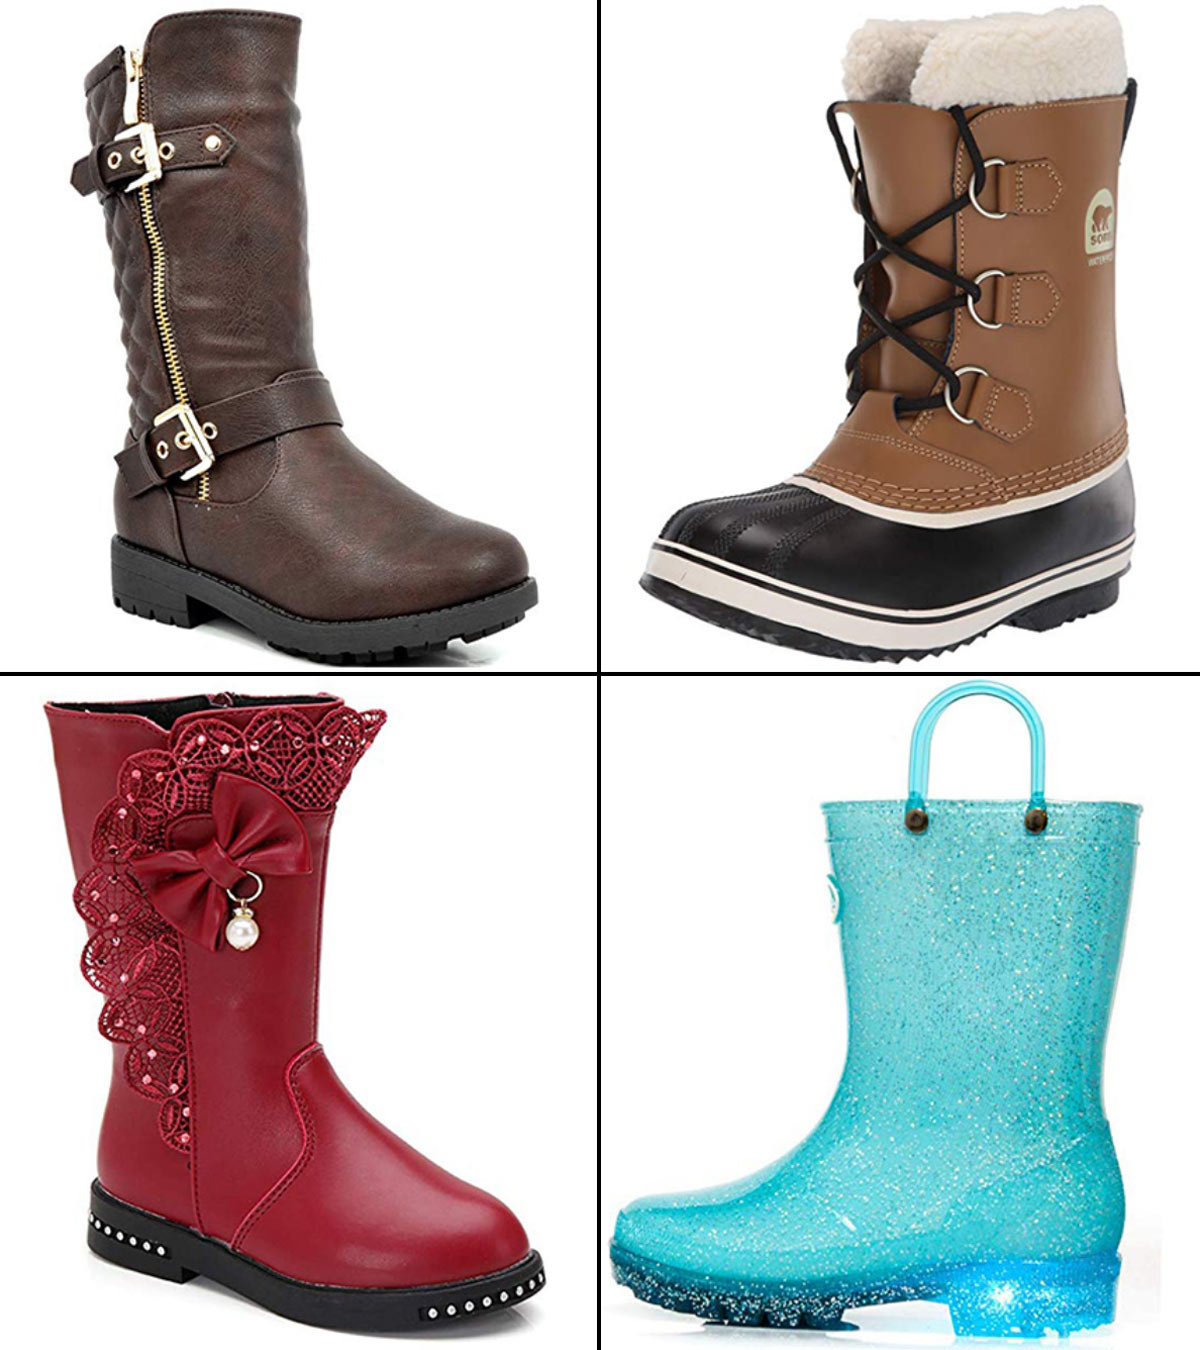 15 Best Boots For Girls To Buy In 2021